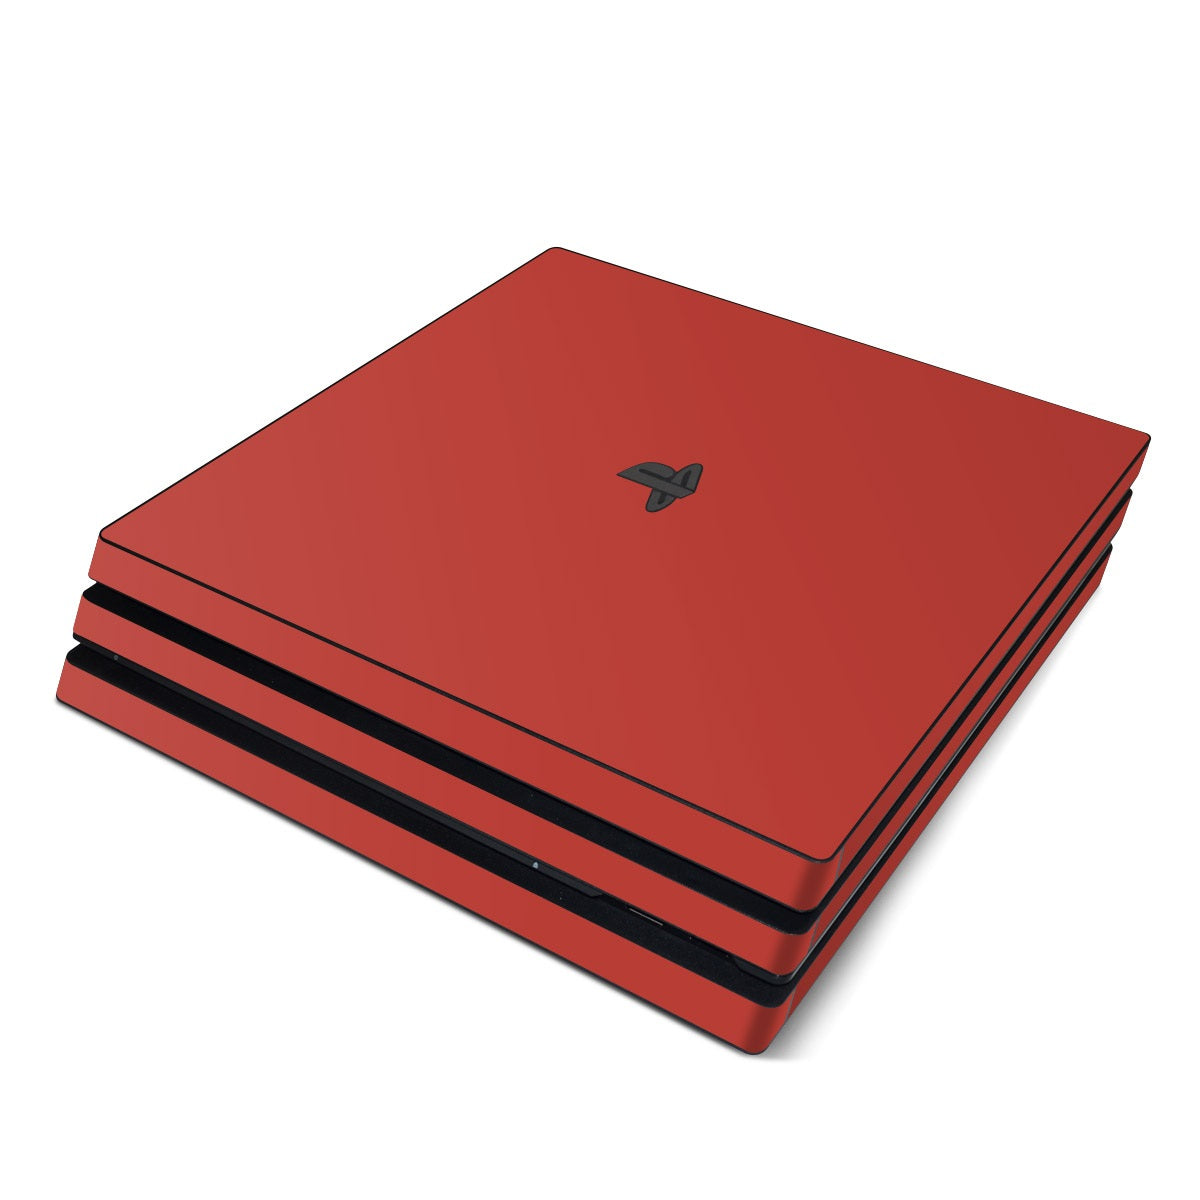 Solid State Berry - Sony PS4 Pro Skin